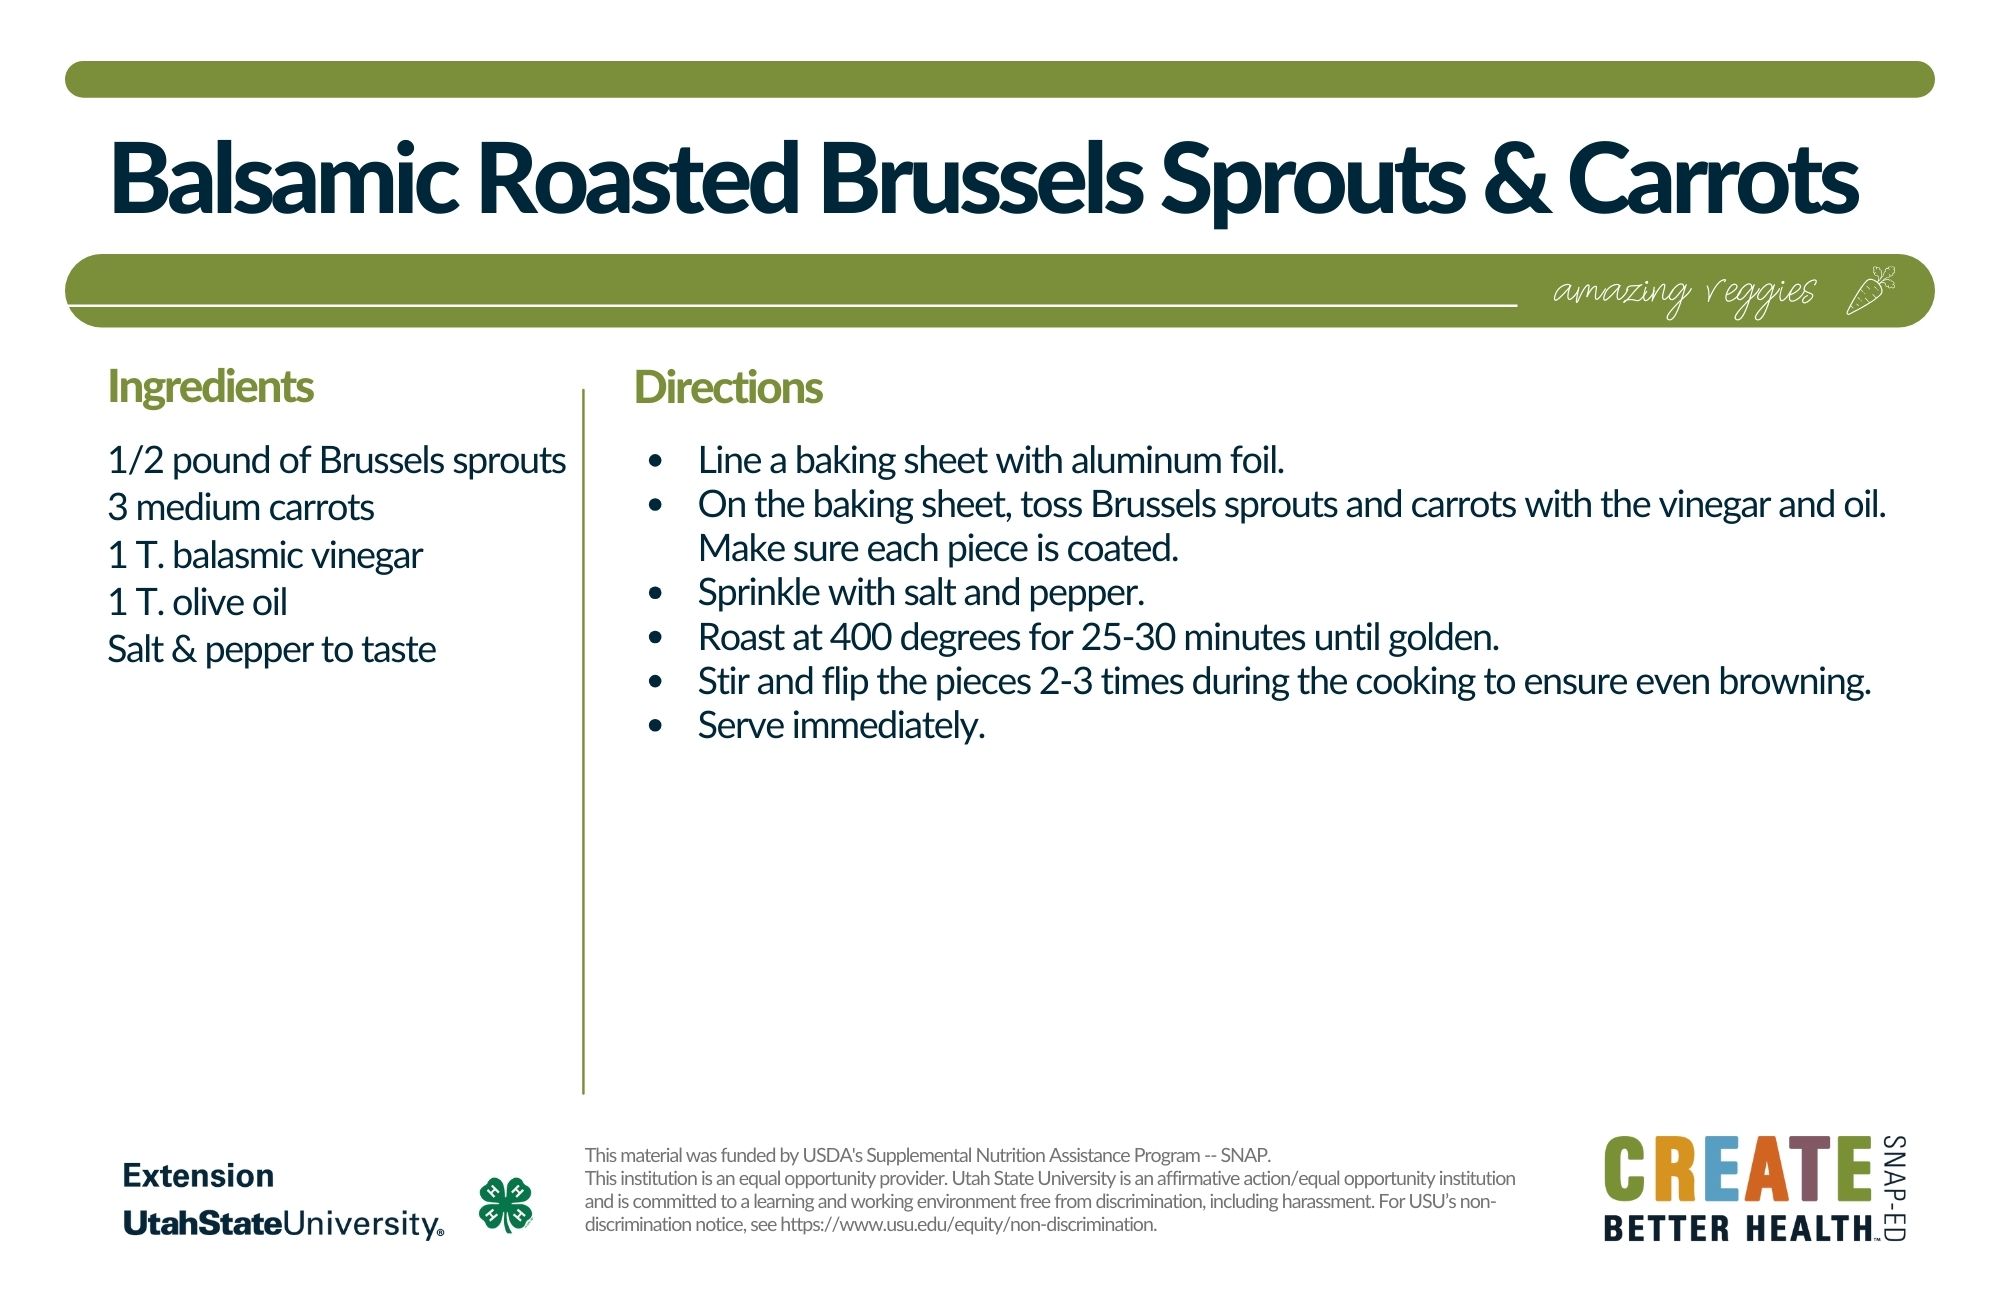 brussel sprouts and carrots recipe card 